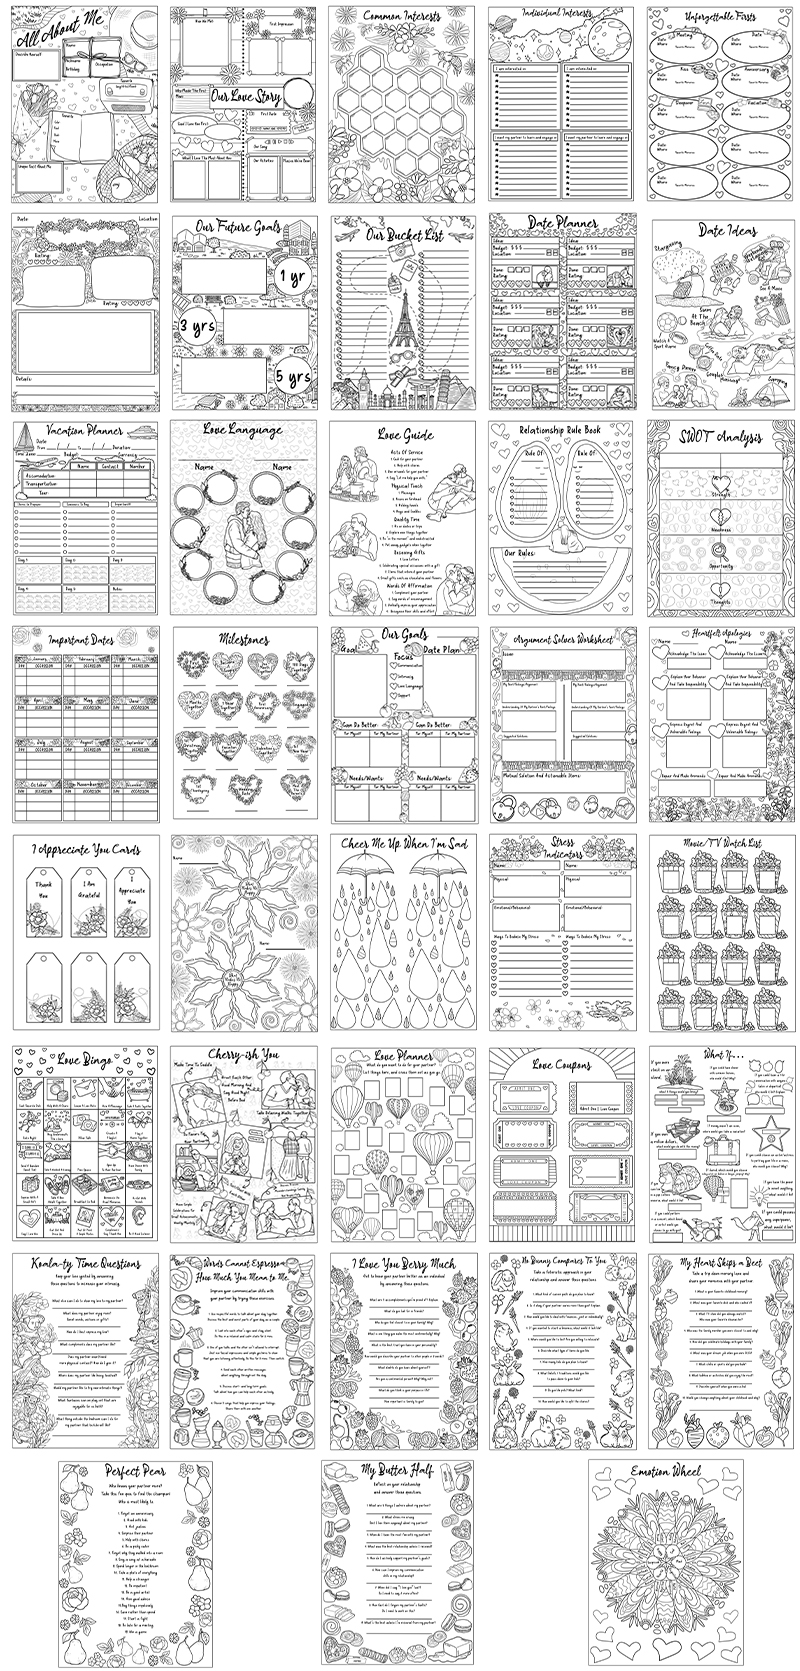 a complete image showing smaller images of all the coloring pages in a package about love & romance